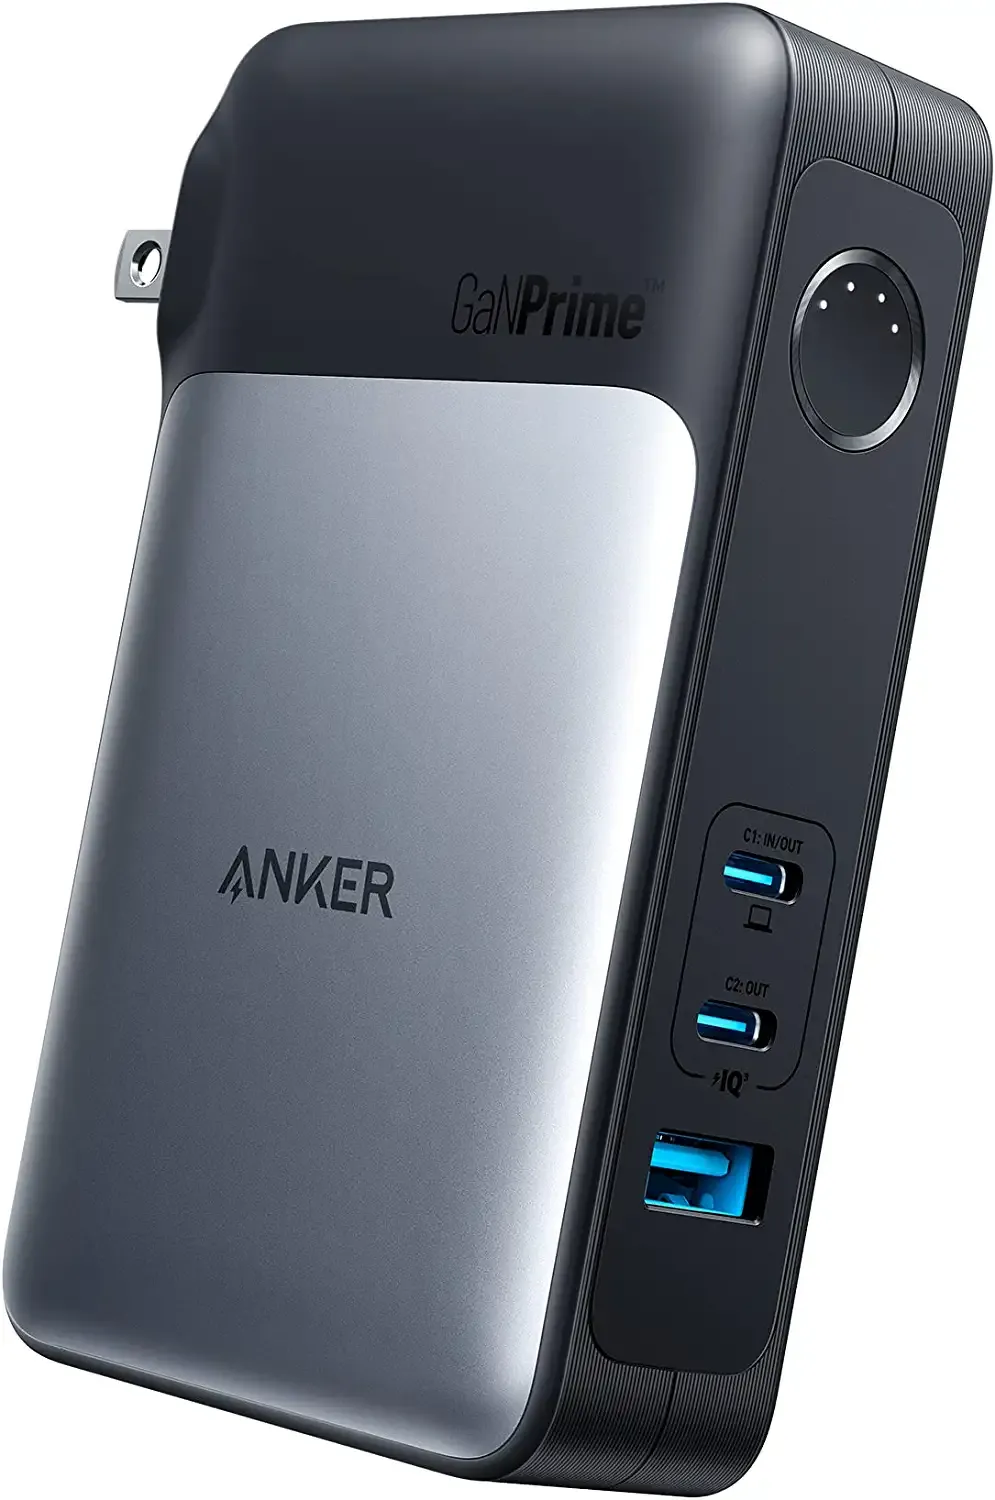 What if your charger worked without being plugged in? This 10,000mAh Anker power bank doubles as a wall charger and it can provide up to 65W of power, whether at home or the road.